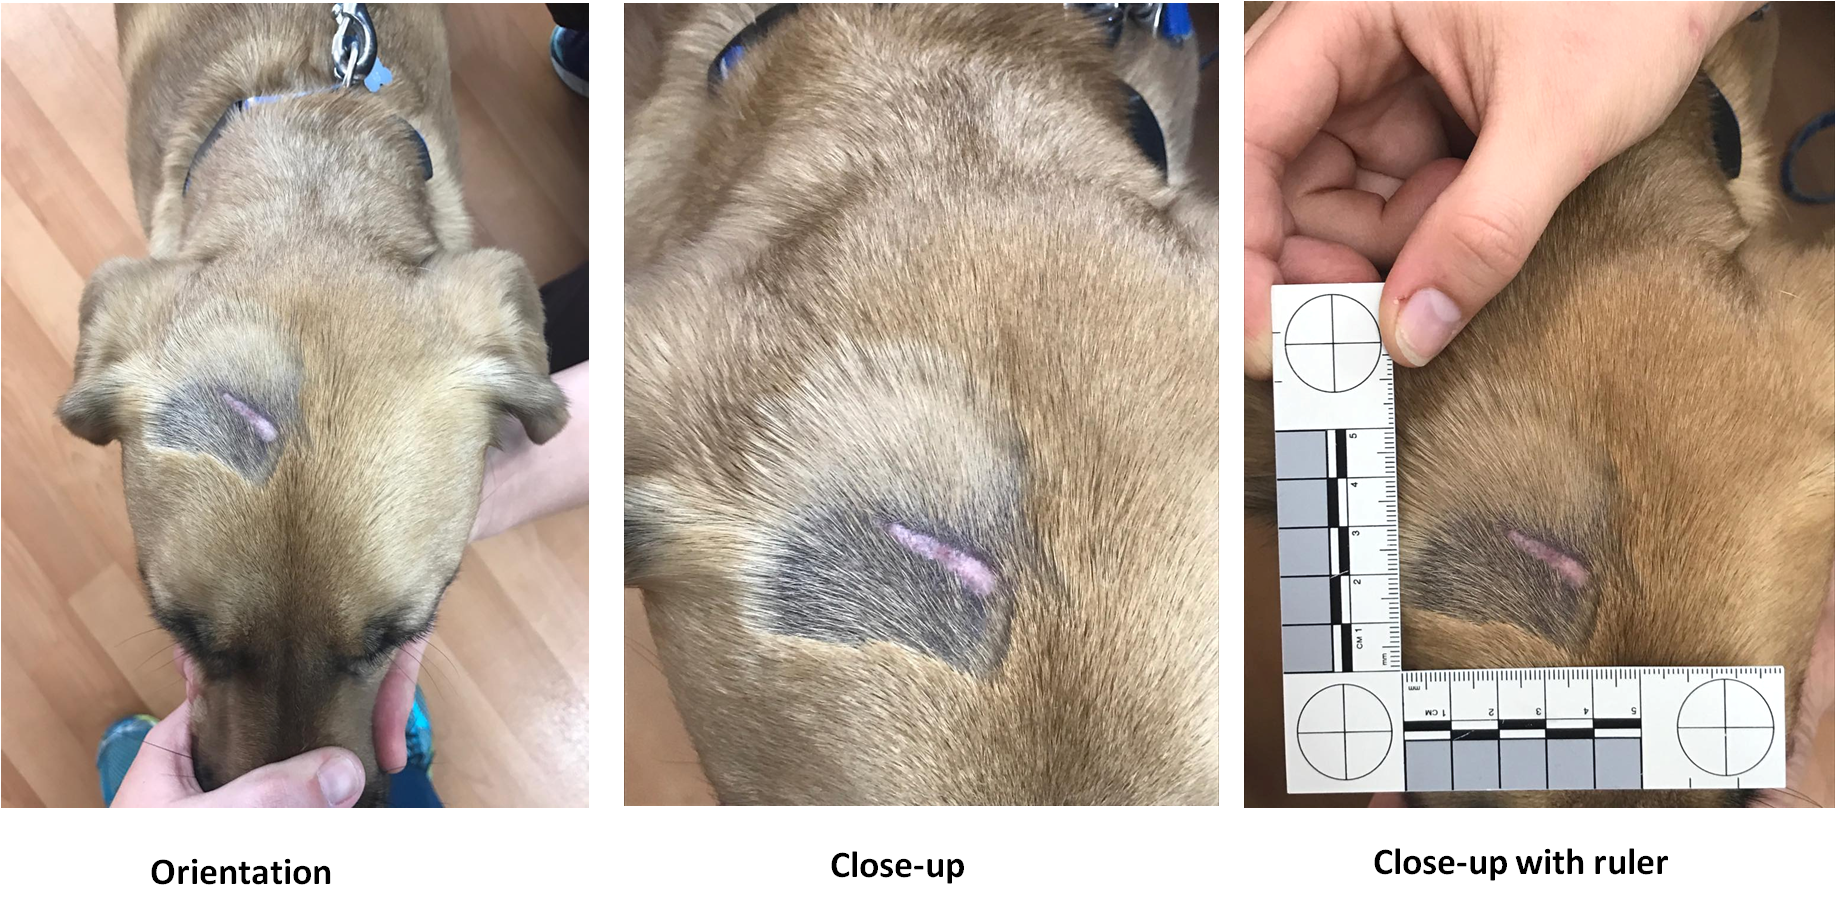 Orientation, close-up without ruler, and close-up with ruler photographs of a lesion on a dog’s head